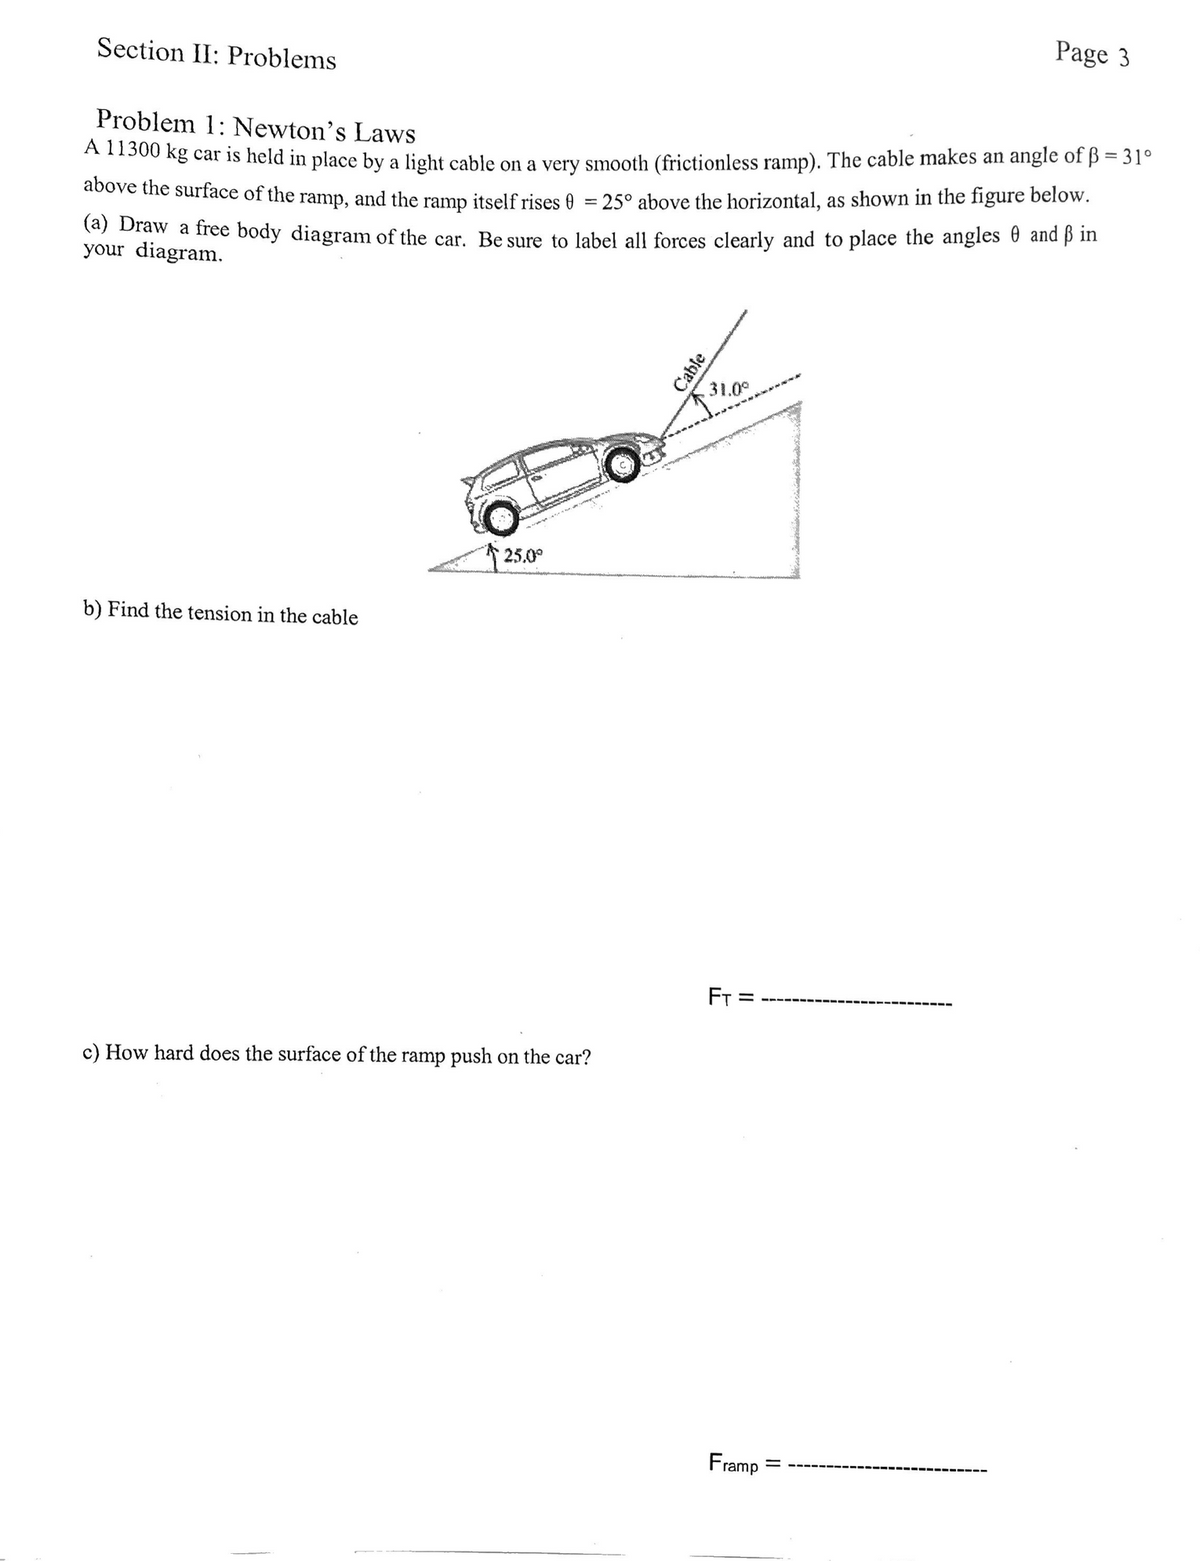 Section II: Problems
Page 3
Problem 1: Newton's Laws
A1300 kg car is held in place by a light cable on a very smooth (frictionless ramp). The cable makes an angle of ß = 31°
above the surface of the ramp, and the ramp itself rises &
25° above the horizontal, as shown in the figure below.
(a) Draw a free body diagram of the car. Be sure to label all forces clearly and to place the angles 6 and p in
your diagram.
31.0°
www.
25.0°
b) Find the tension in the cable
FT
c) How hard does the surface of the ramp push on the car?
Framp
Cable
